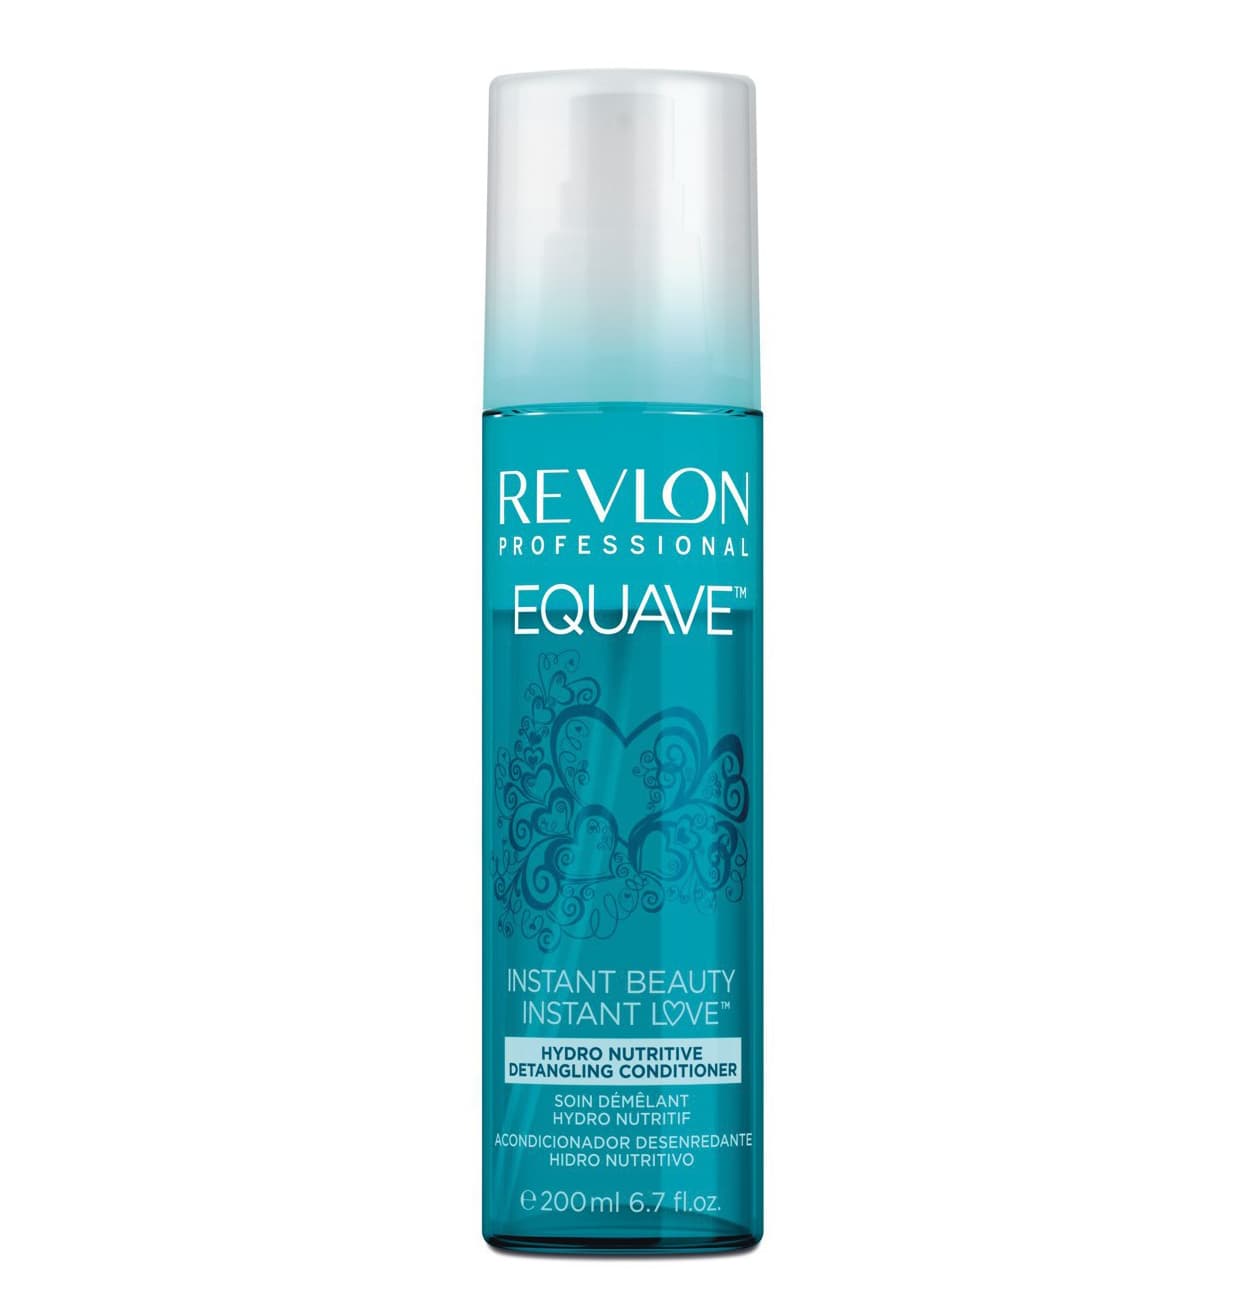 Equave Instant Beauty Hydro Nutritive Несмываемый Разглажива